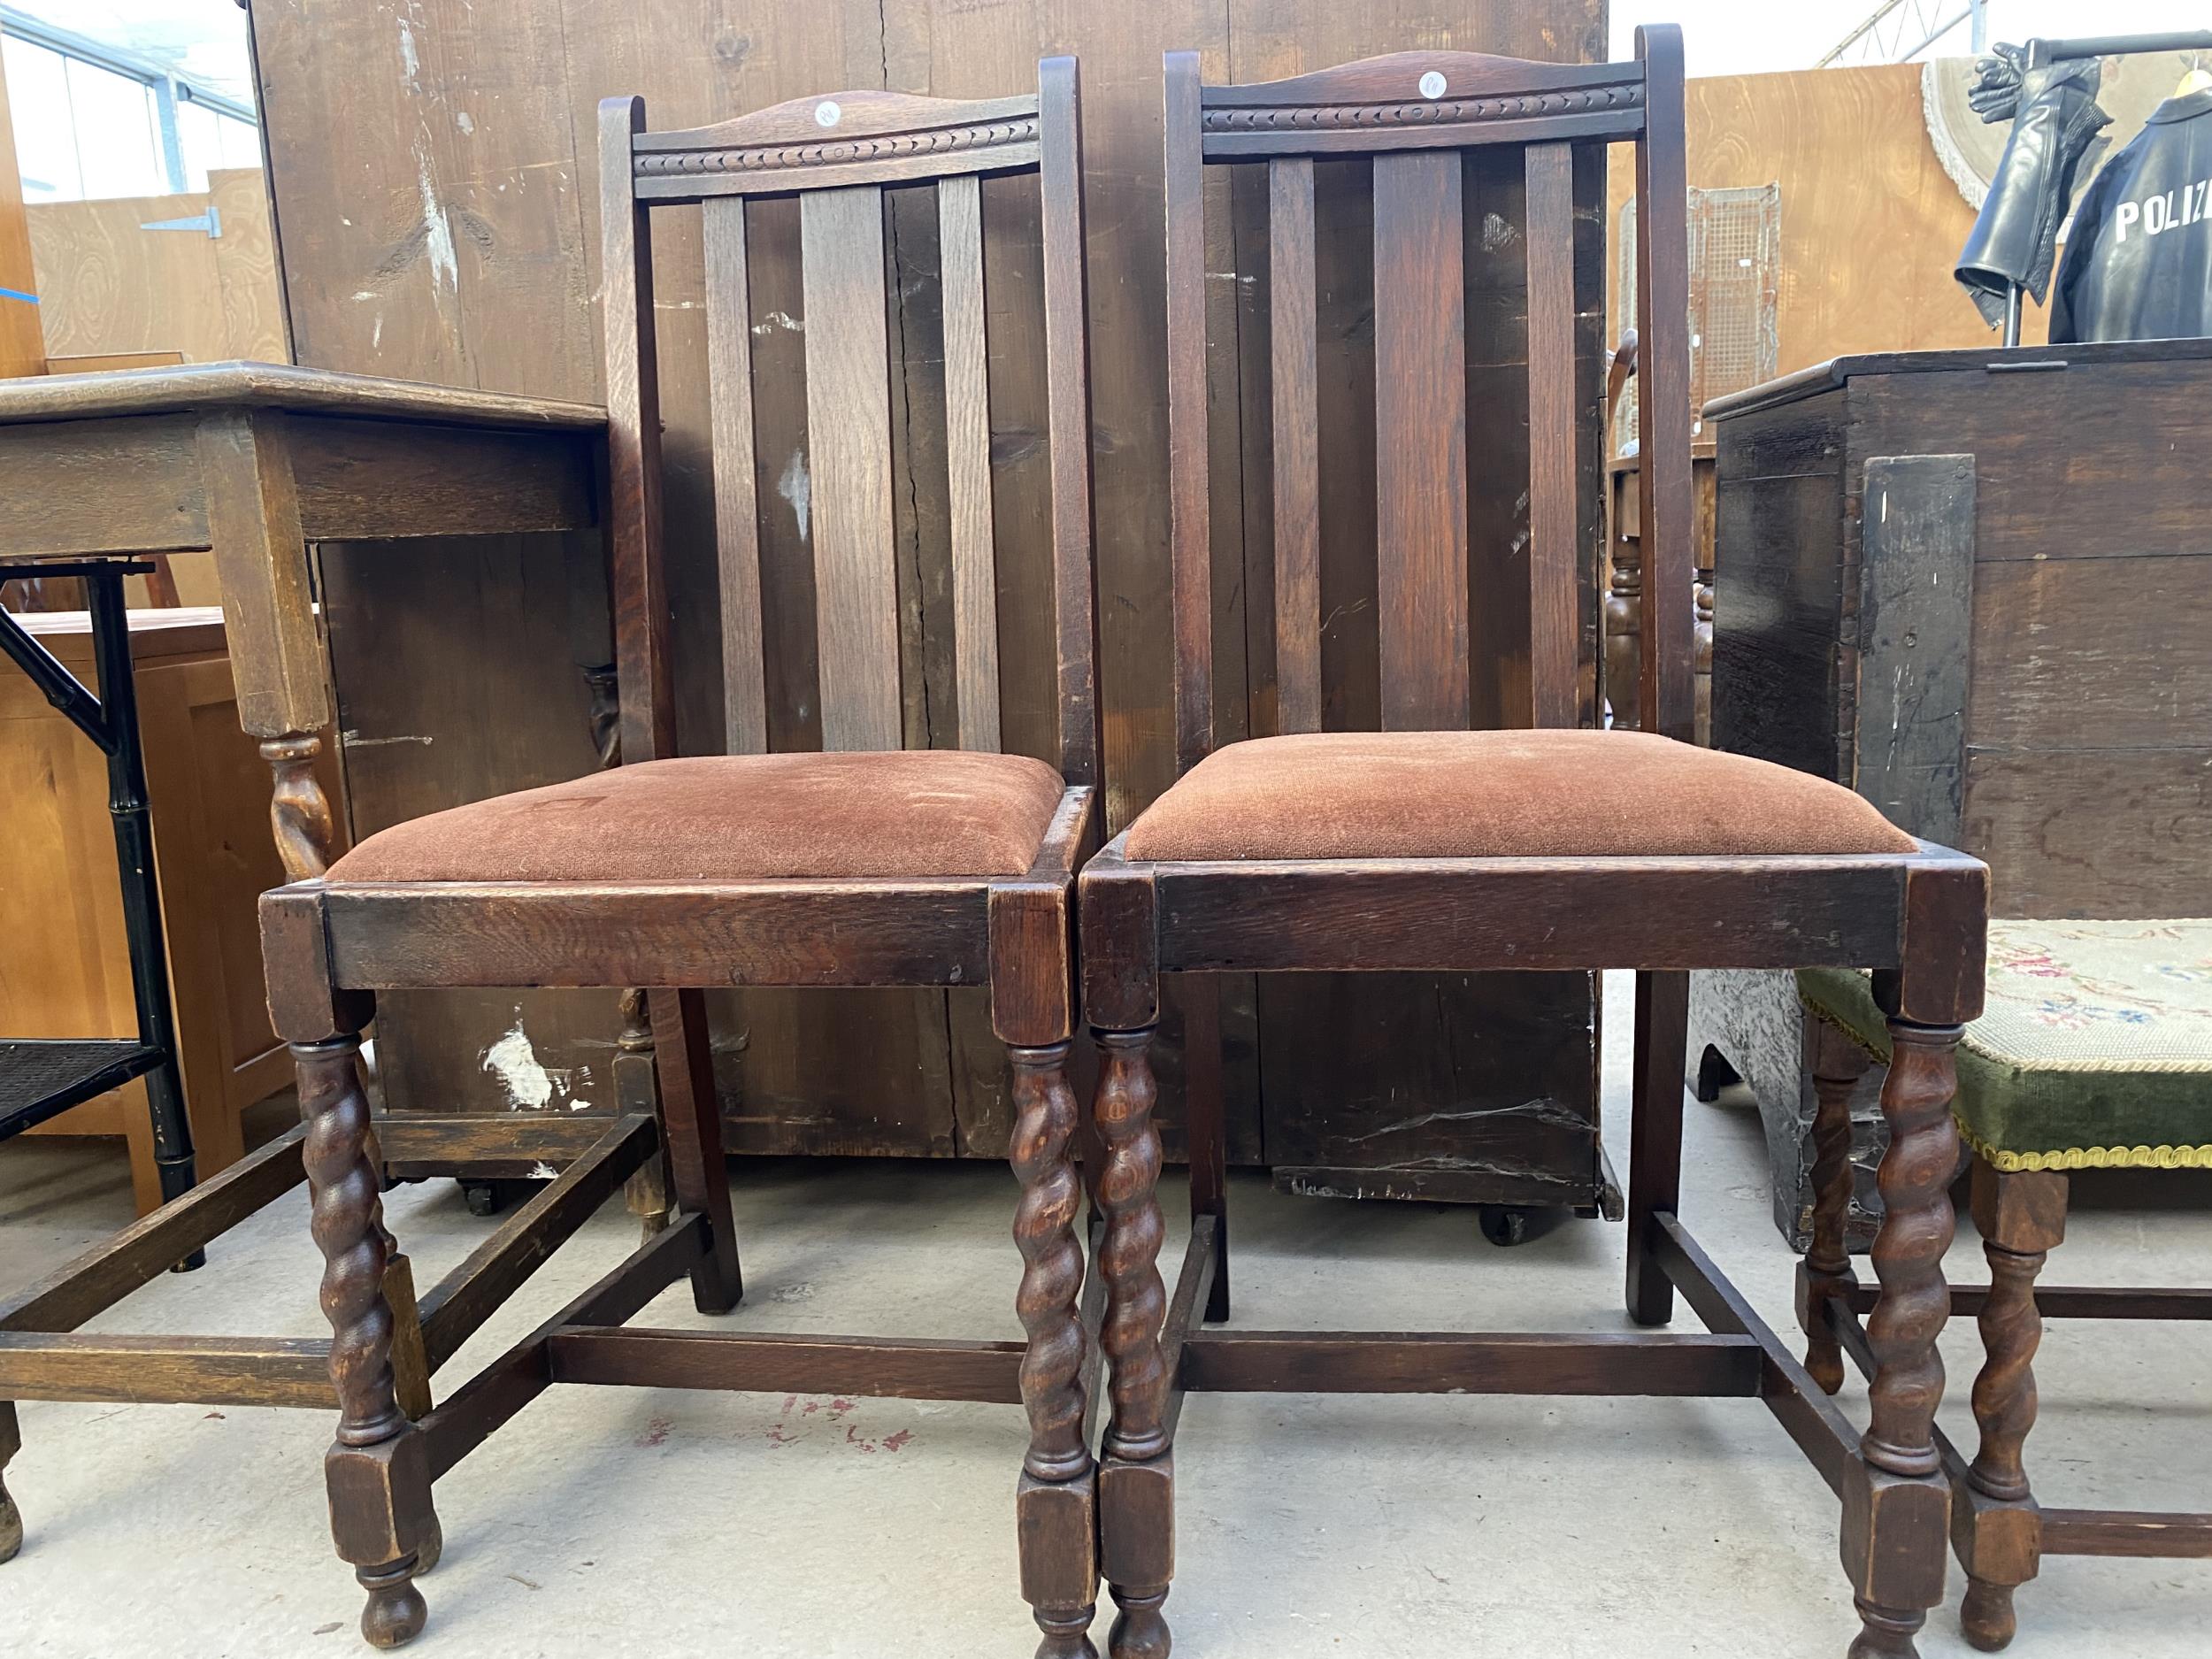 AN EARLY 20TH CENTURY OAK SIDE TABLE WITH BARLEY TWIST SUPPORTS AND TWO OAK DINING CHAIRS - Image 3 of 3